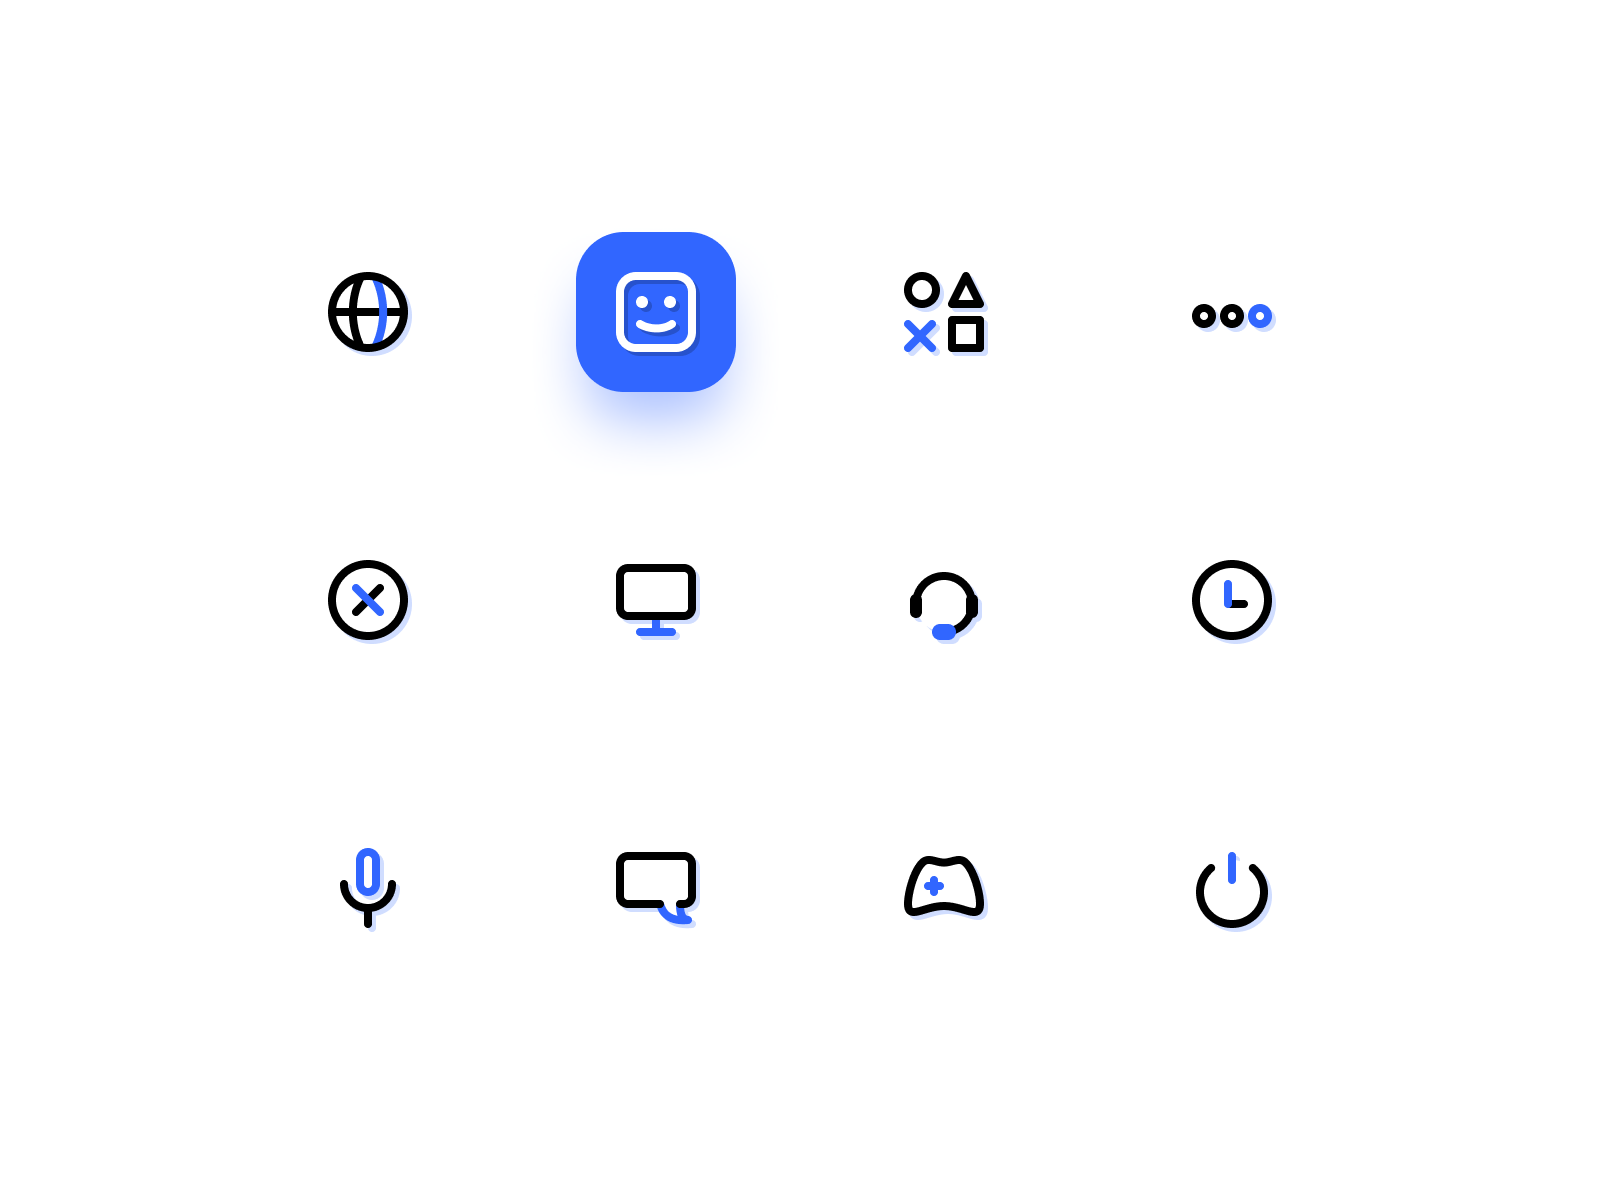 PS 5 icons set by Alex Martinov on Dribbble